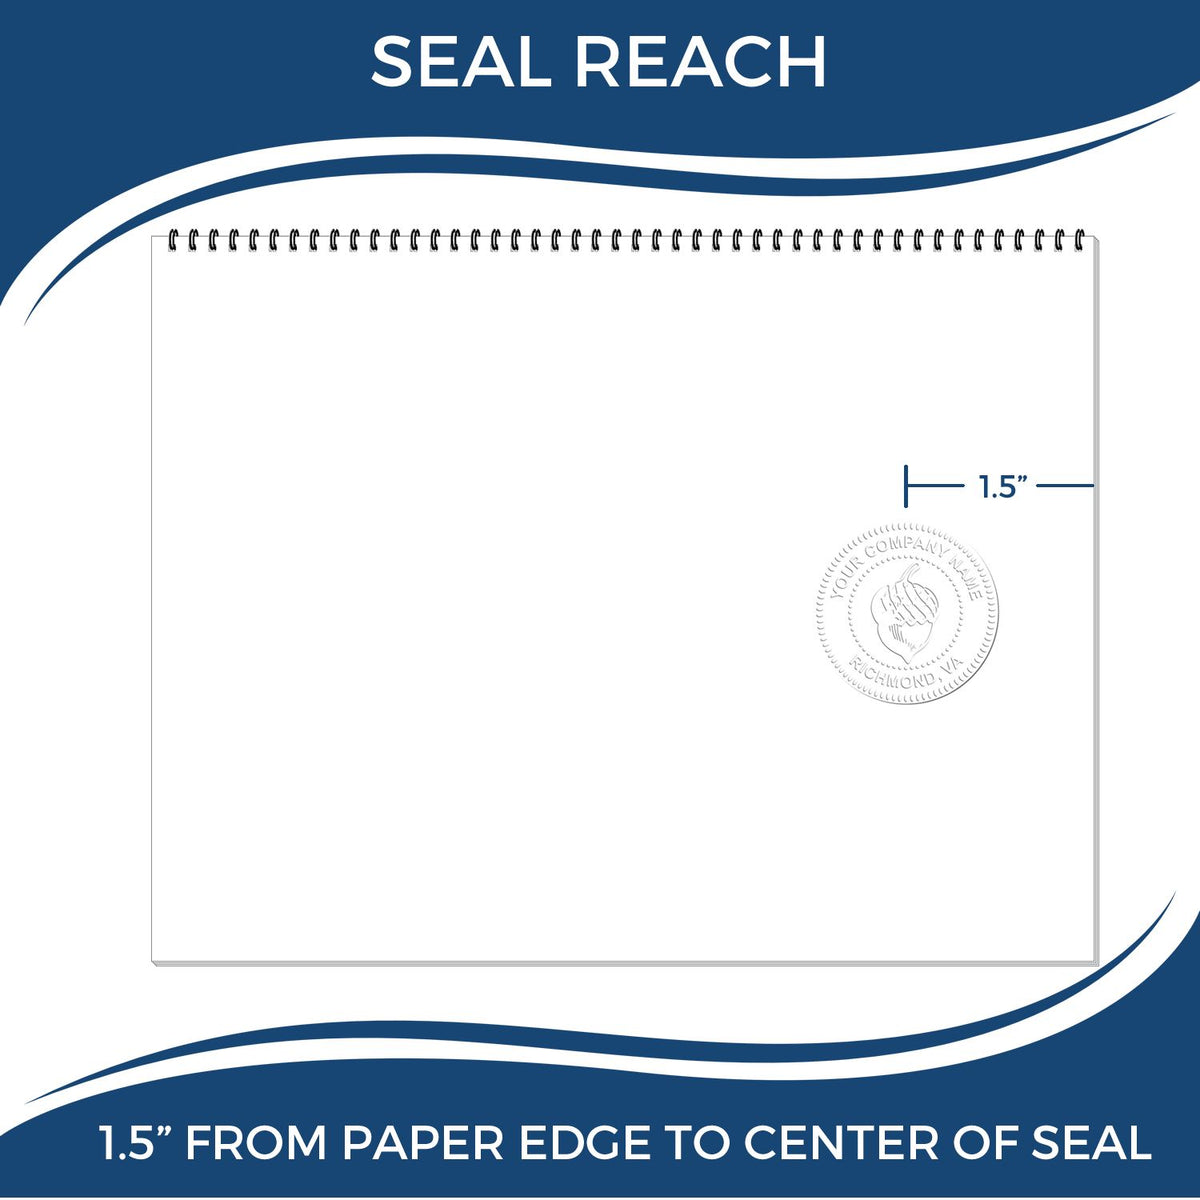 An infographic showing the seal reach which is represented by a ruler and a miniature seal image of the Soft Pocket District of Columbia Landscape Architect Embosser